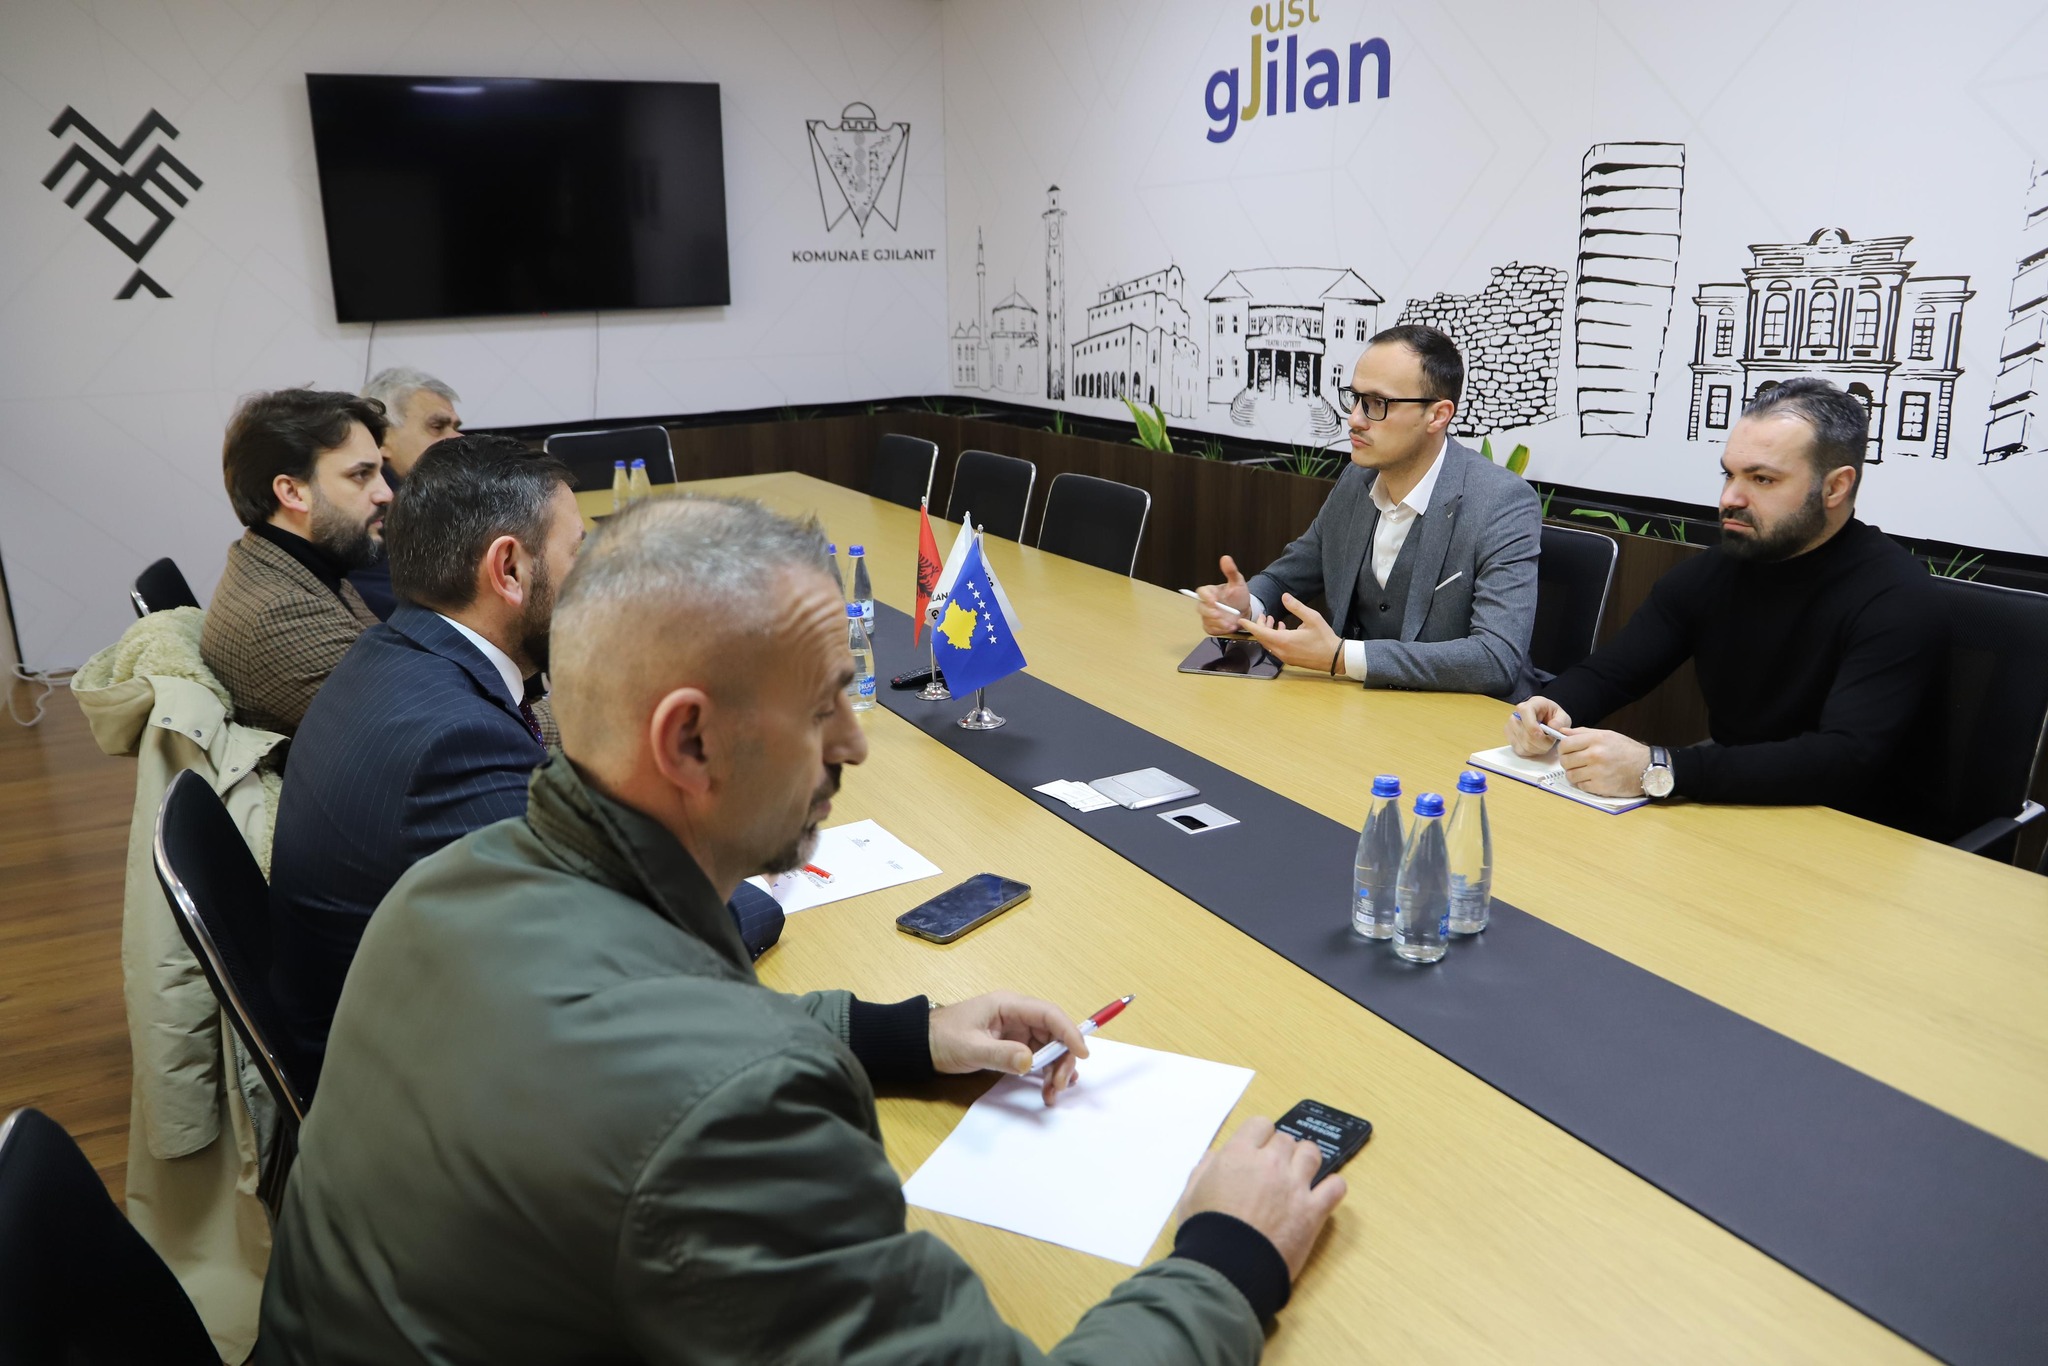 You are currently viewing The Social Audit Group held a meeting with the mayor of the Municipality of Gjilan